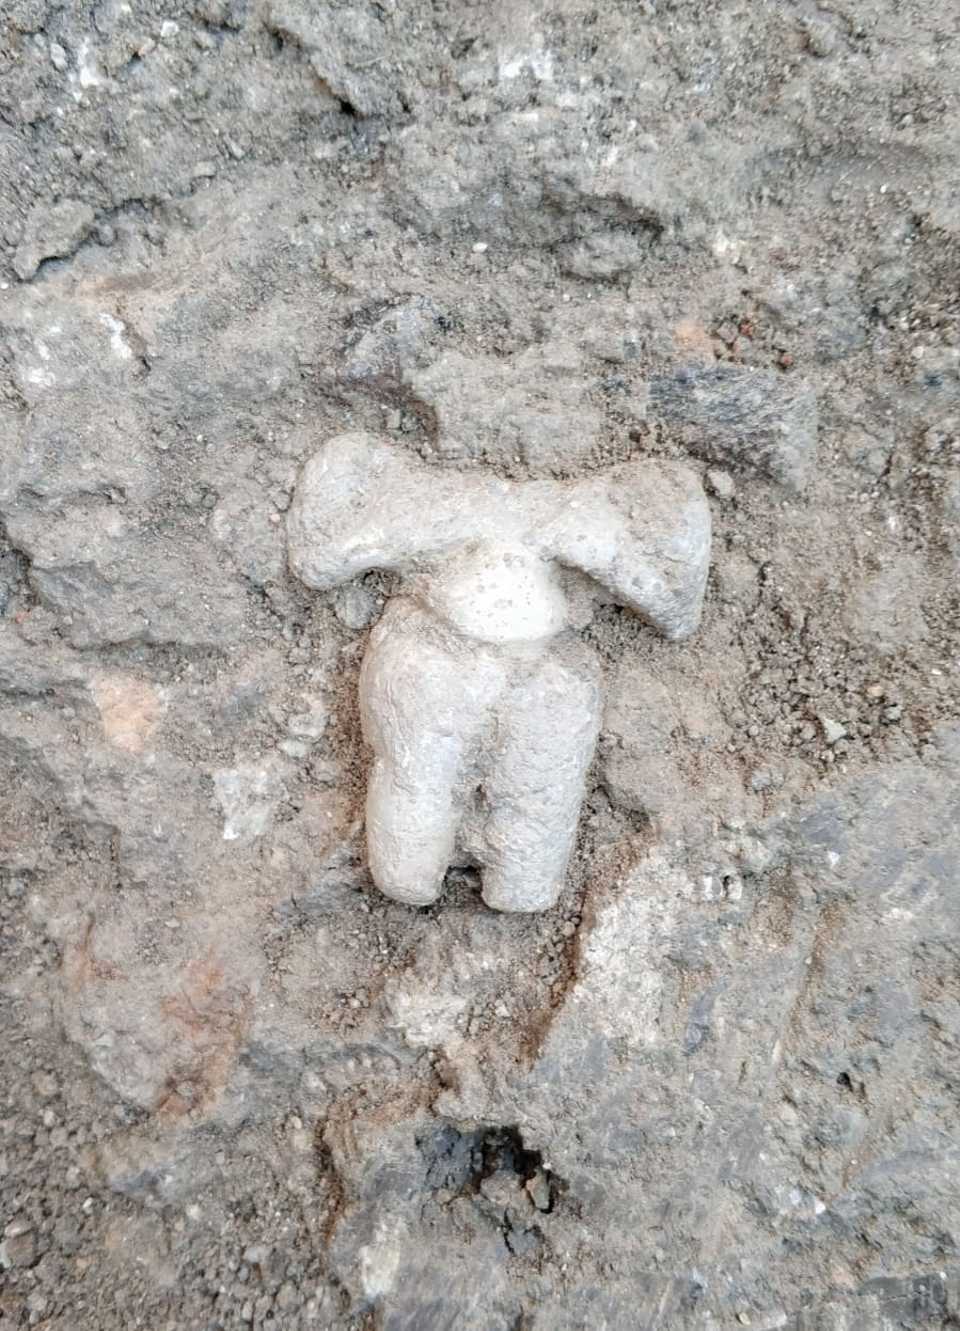 The marble mother goddess figurine was found at the excavation site at Yesilova, Izmir, Turkey.